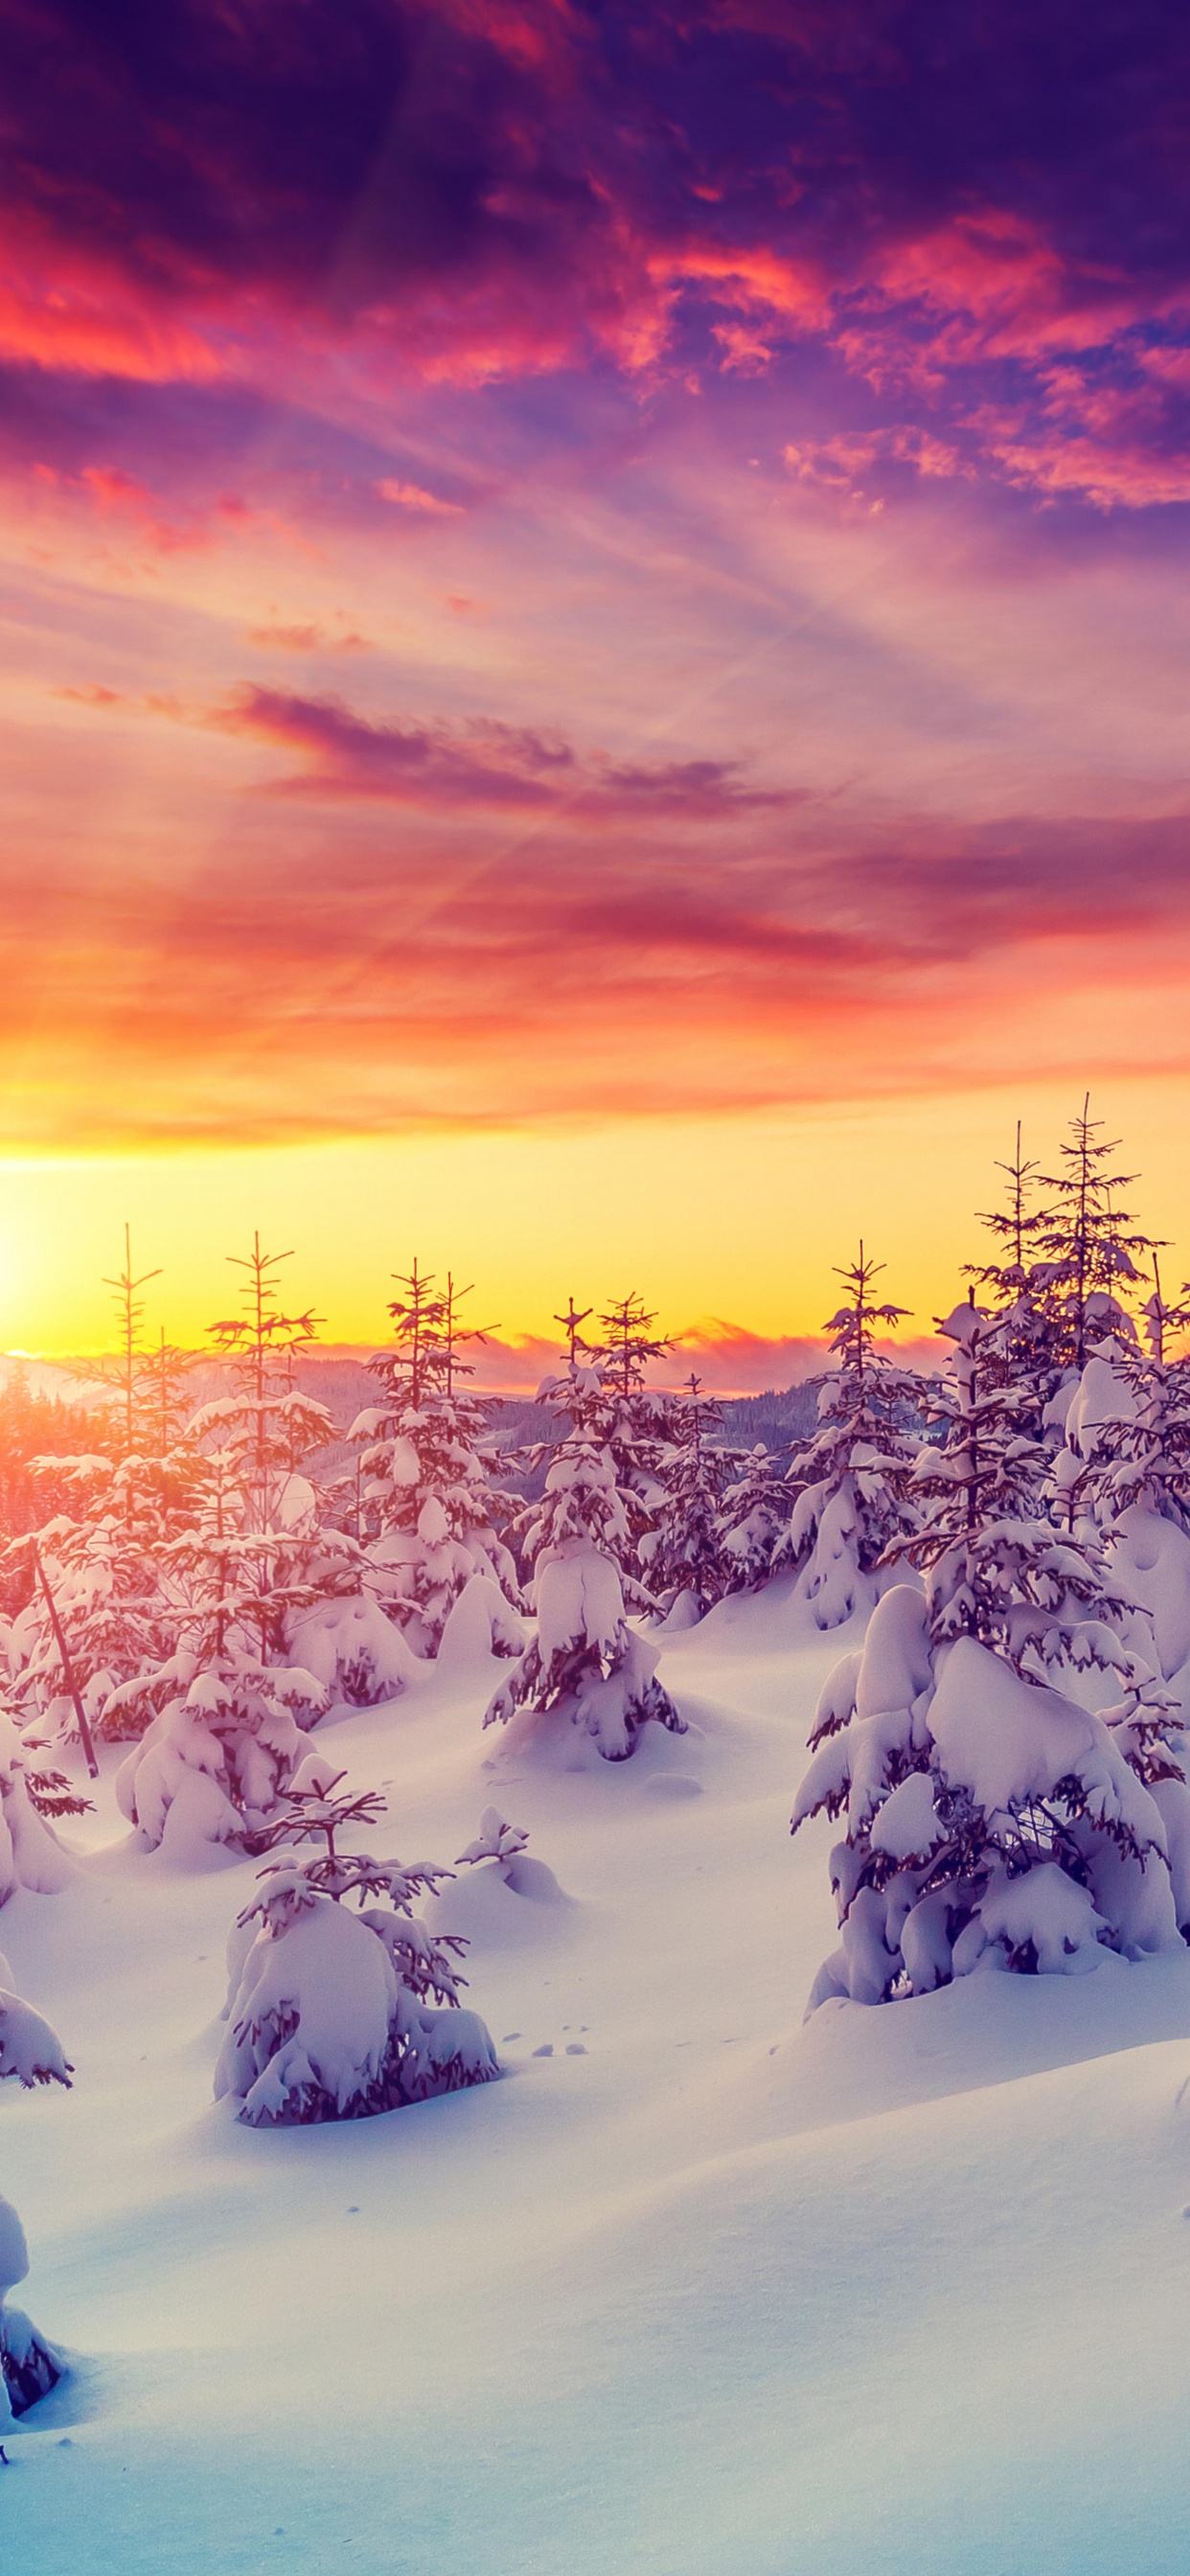 Snow Covered Trees During Sunset. Wallpaper in 1242x2688 Resolution